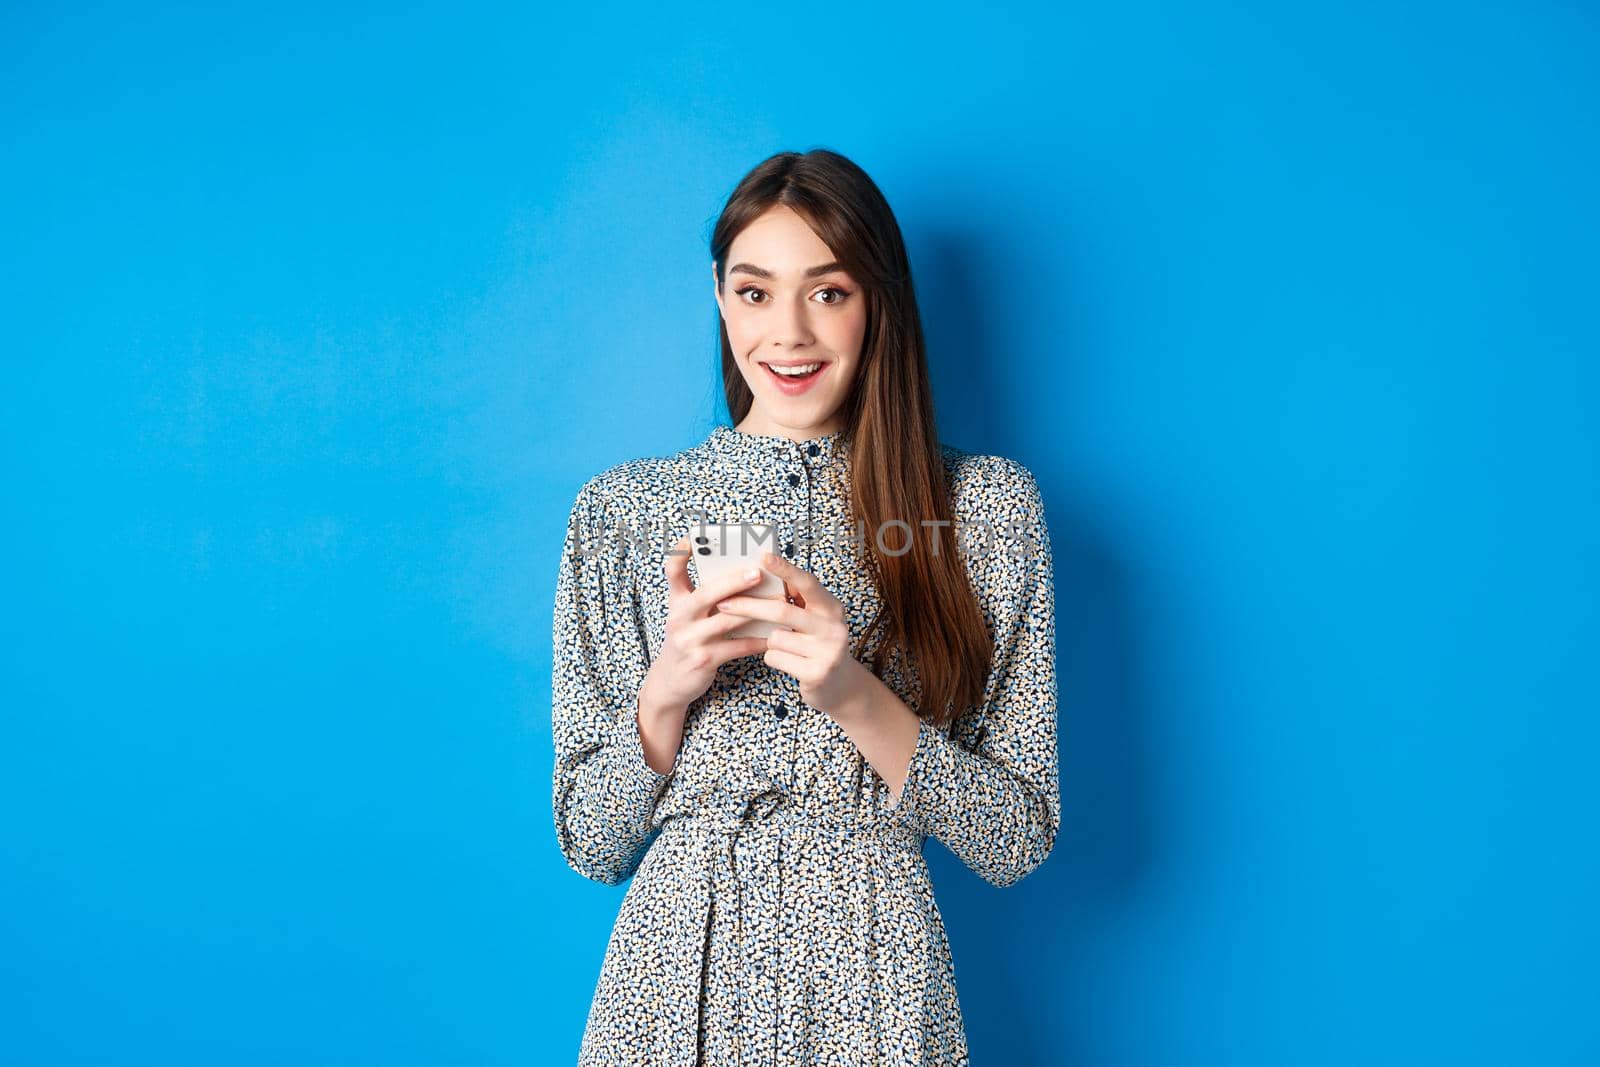 Cute smiling girl with long natural hair, wearing dress, using smartphone and looking happy, standing against blue background.